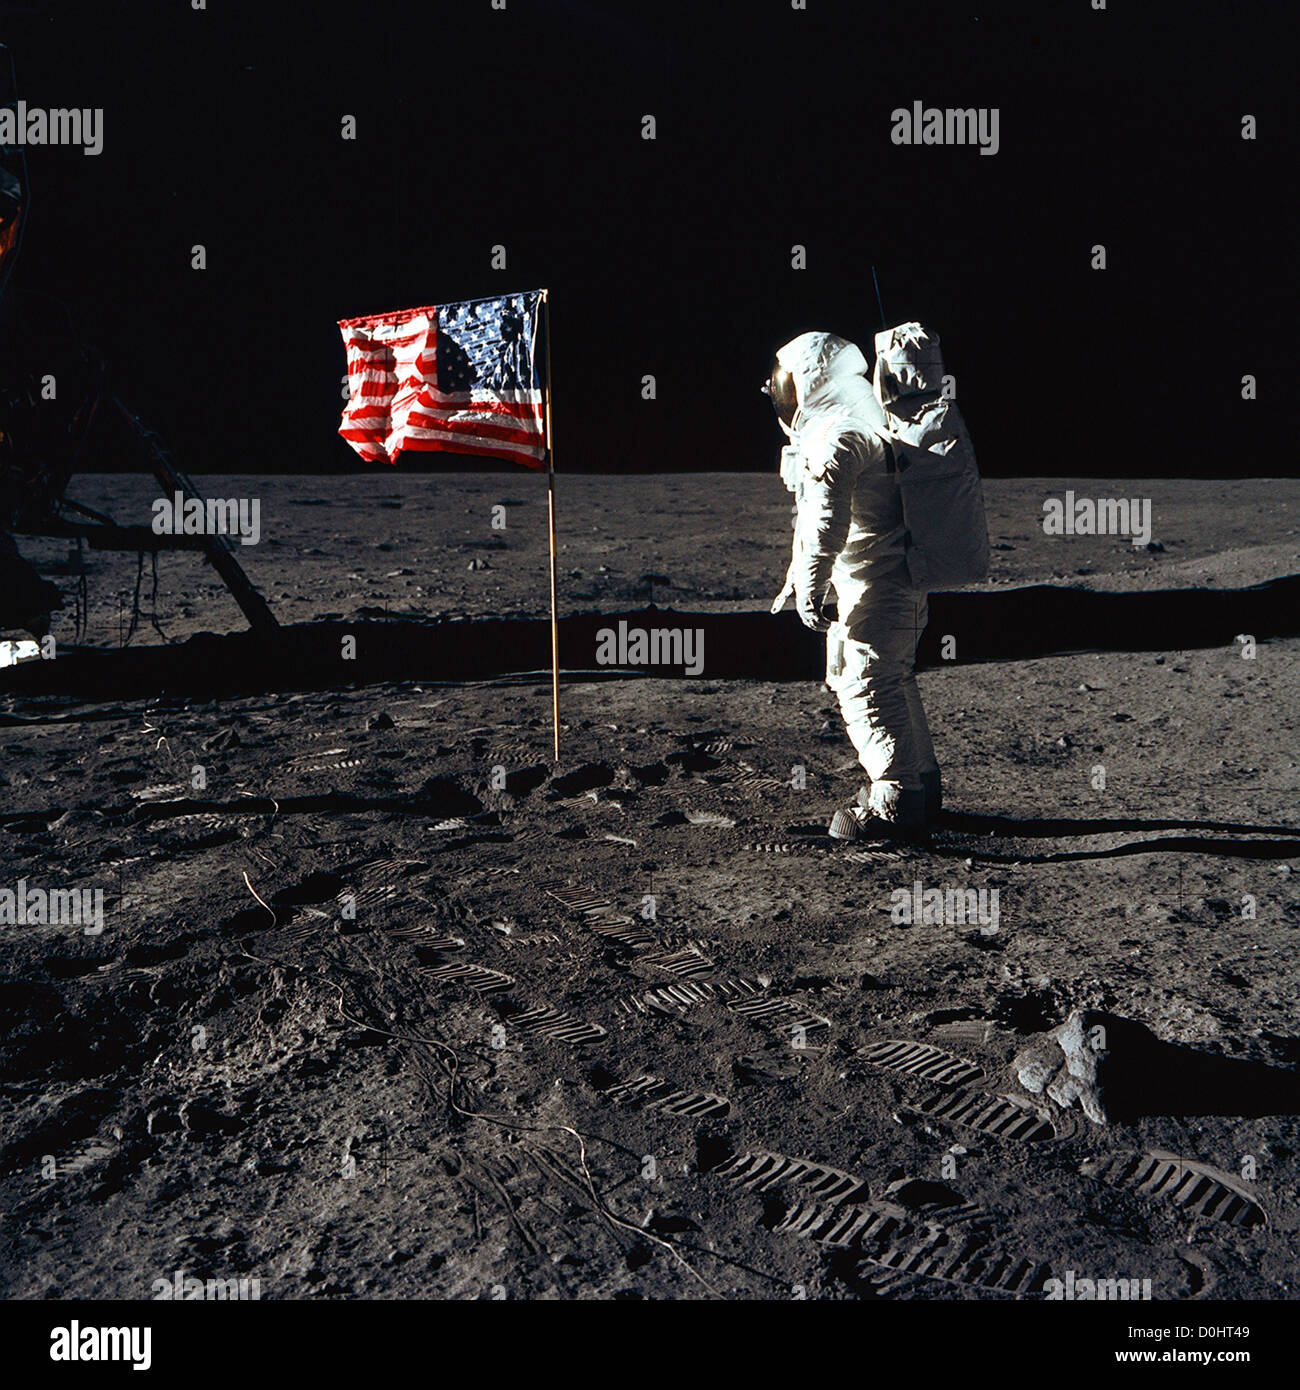 Astronaut Buzz Aldrin, lunar module pilot of the first lunar landing mission, poses for a photograph beside the deployed United Stock Photo